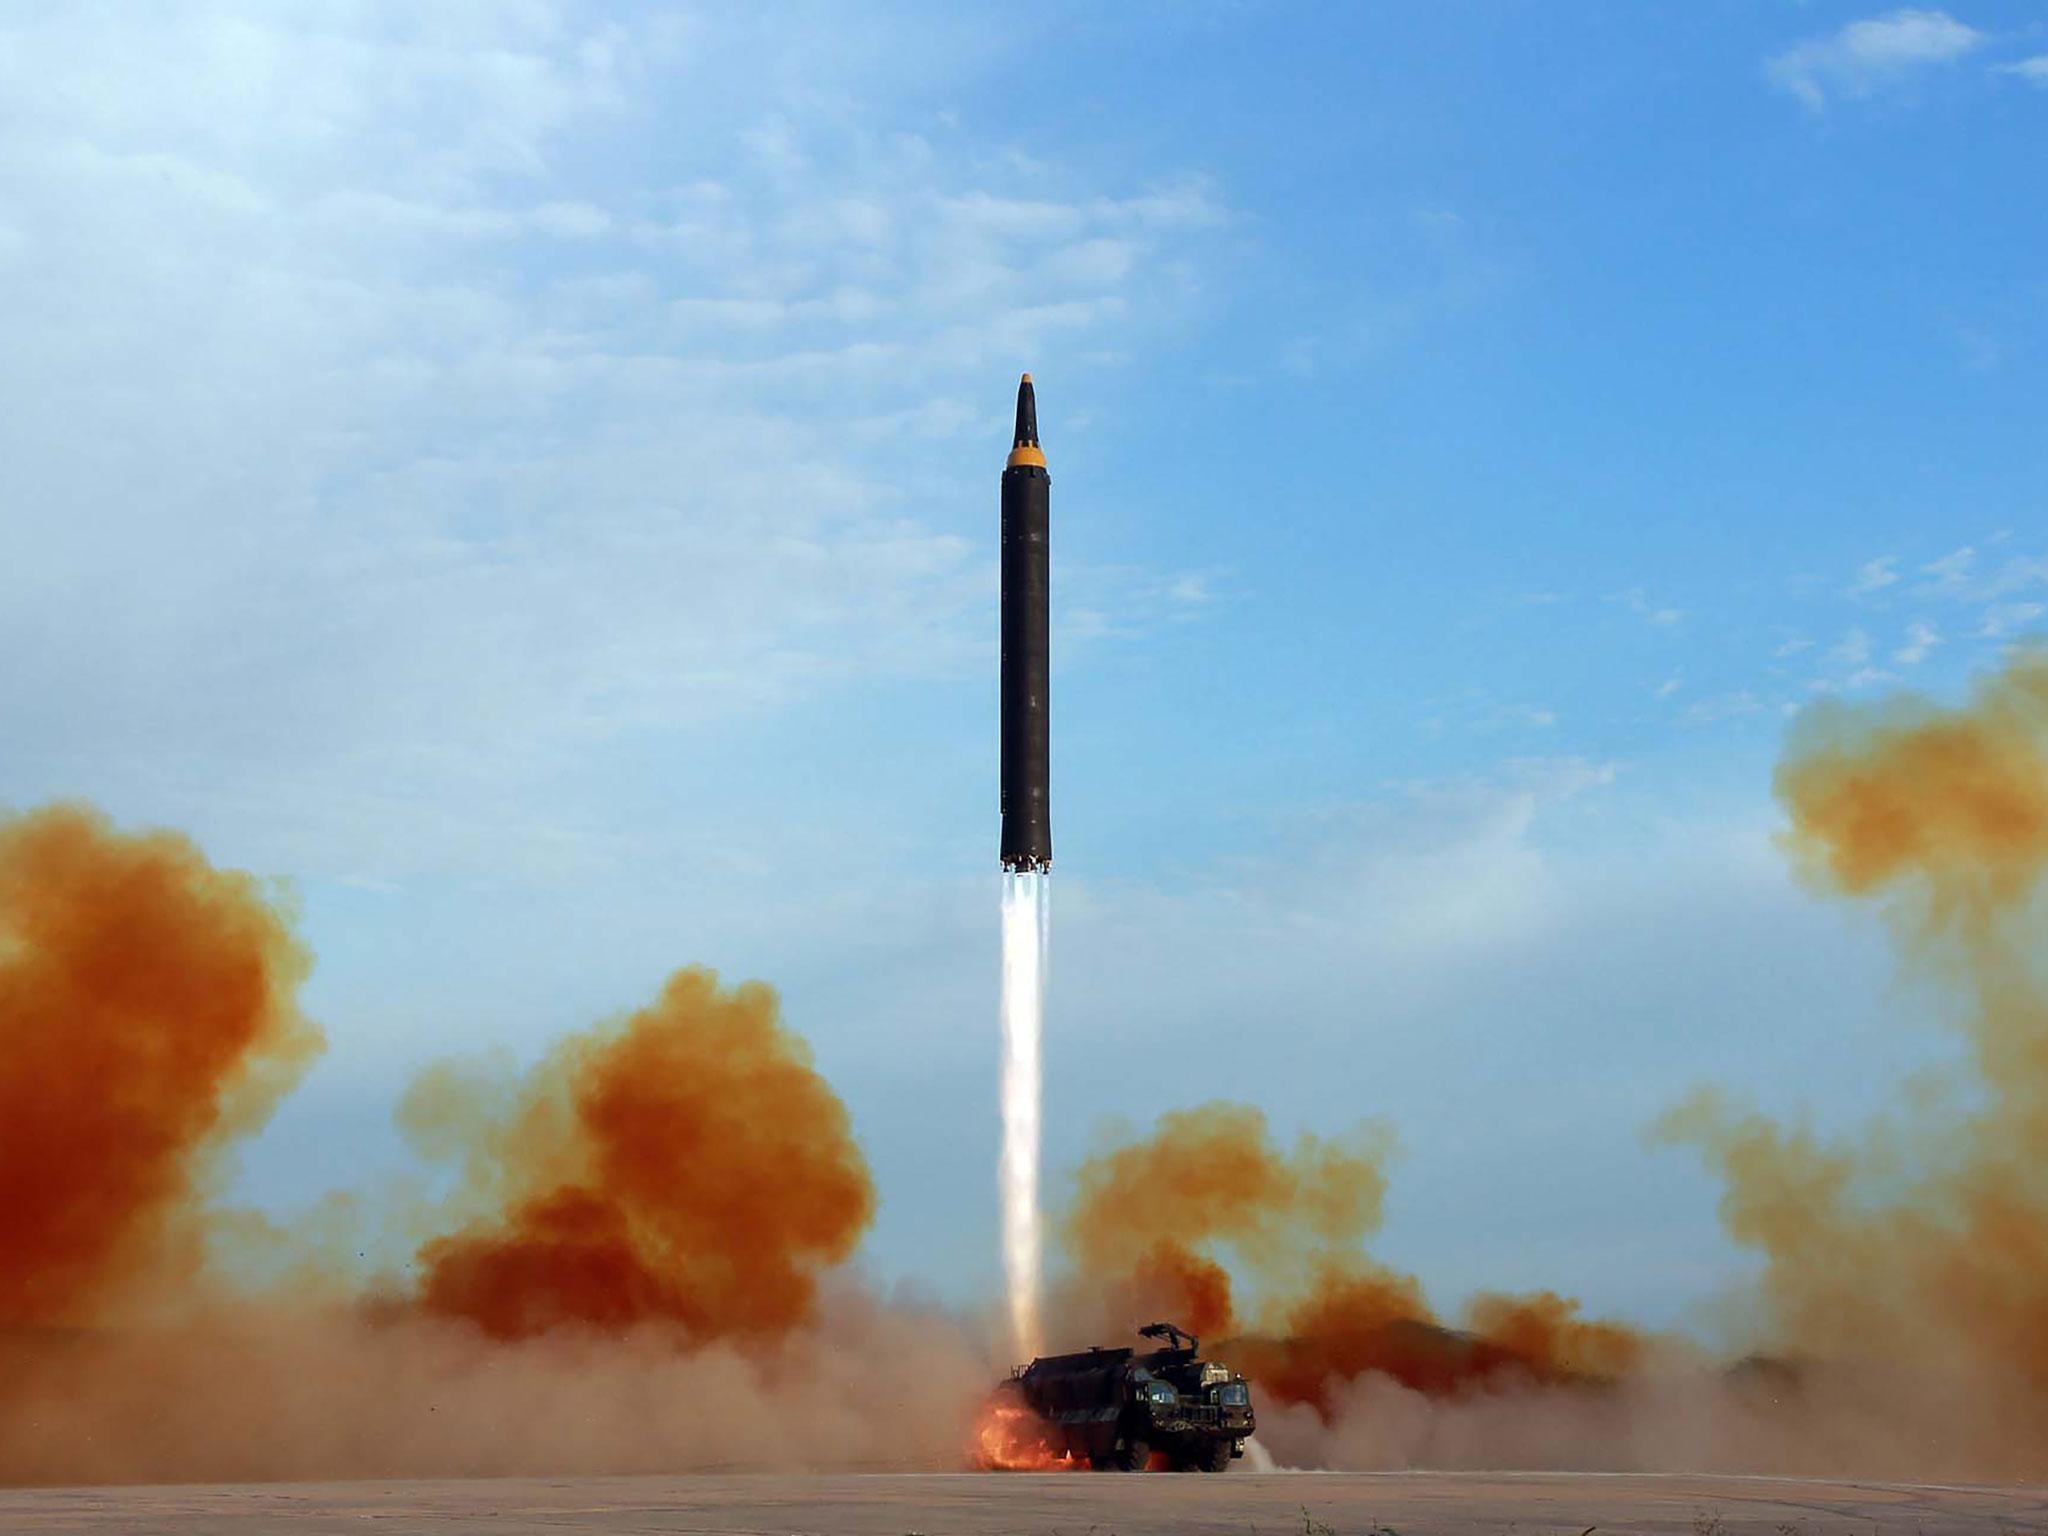 The Hwasong-12 intermediate-range ballistic missile is believed to have crashed into the city Tokchon, which has a population of 200,000